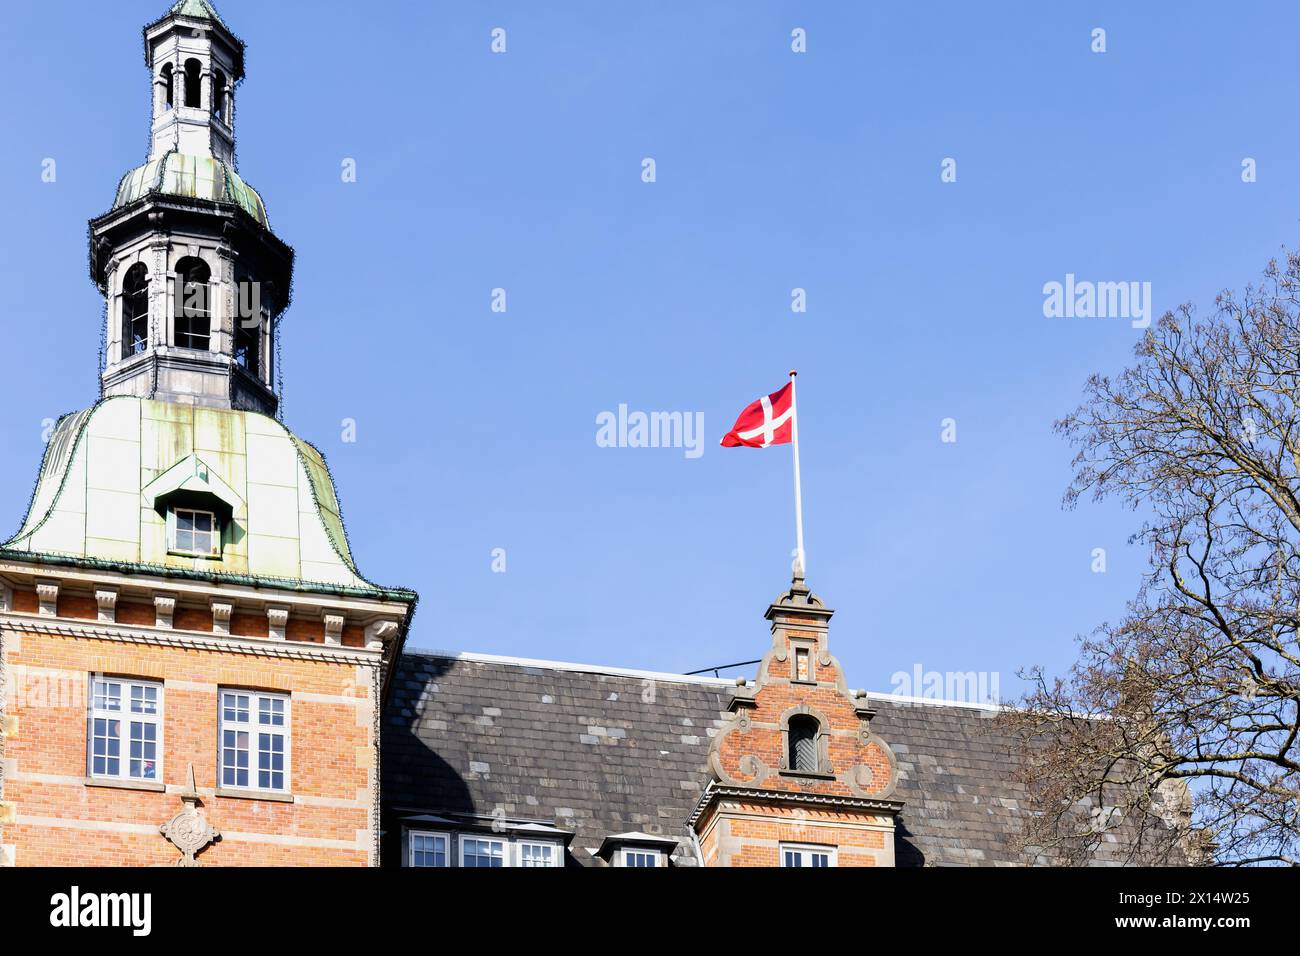 Danish flag on the roof of a building against a blue sky. Stock Photo